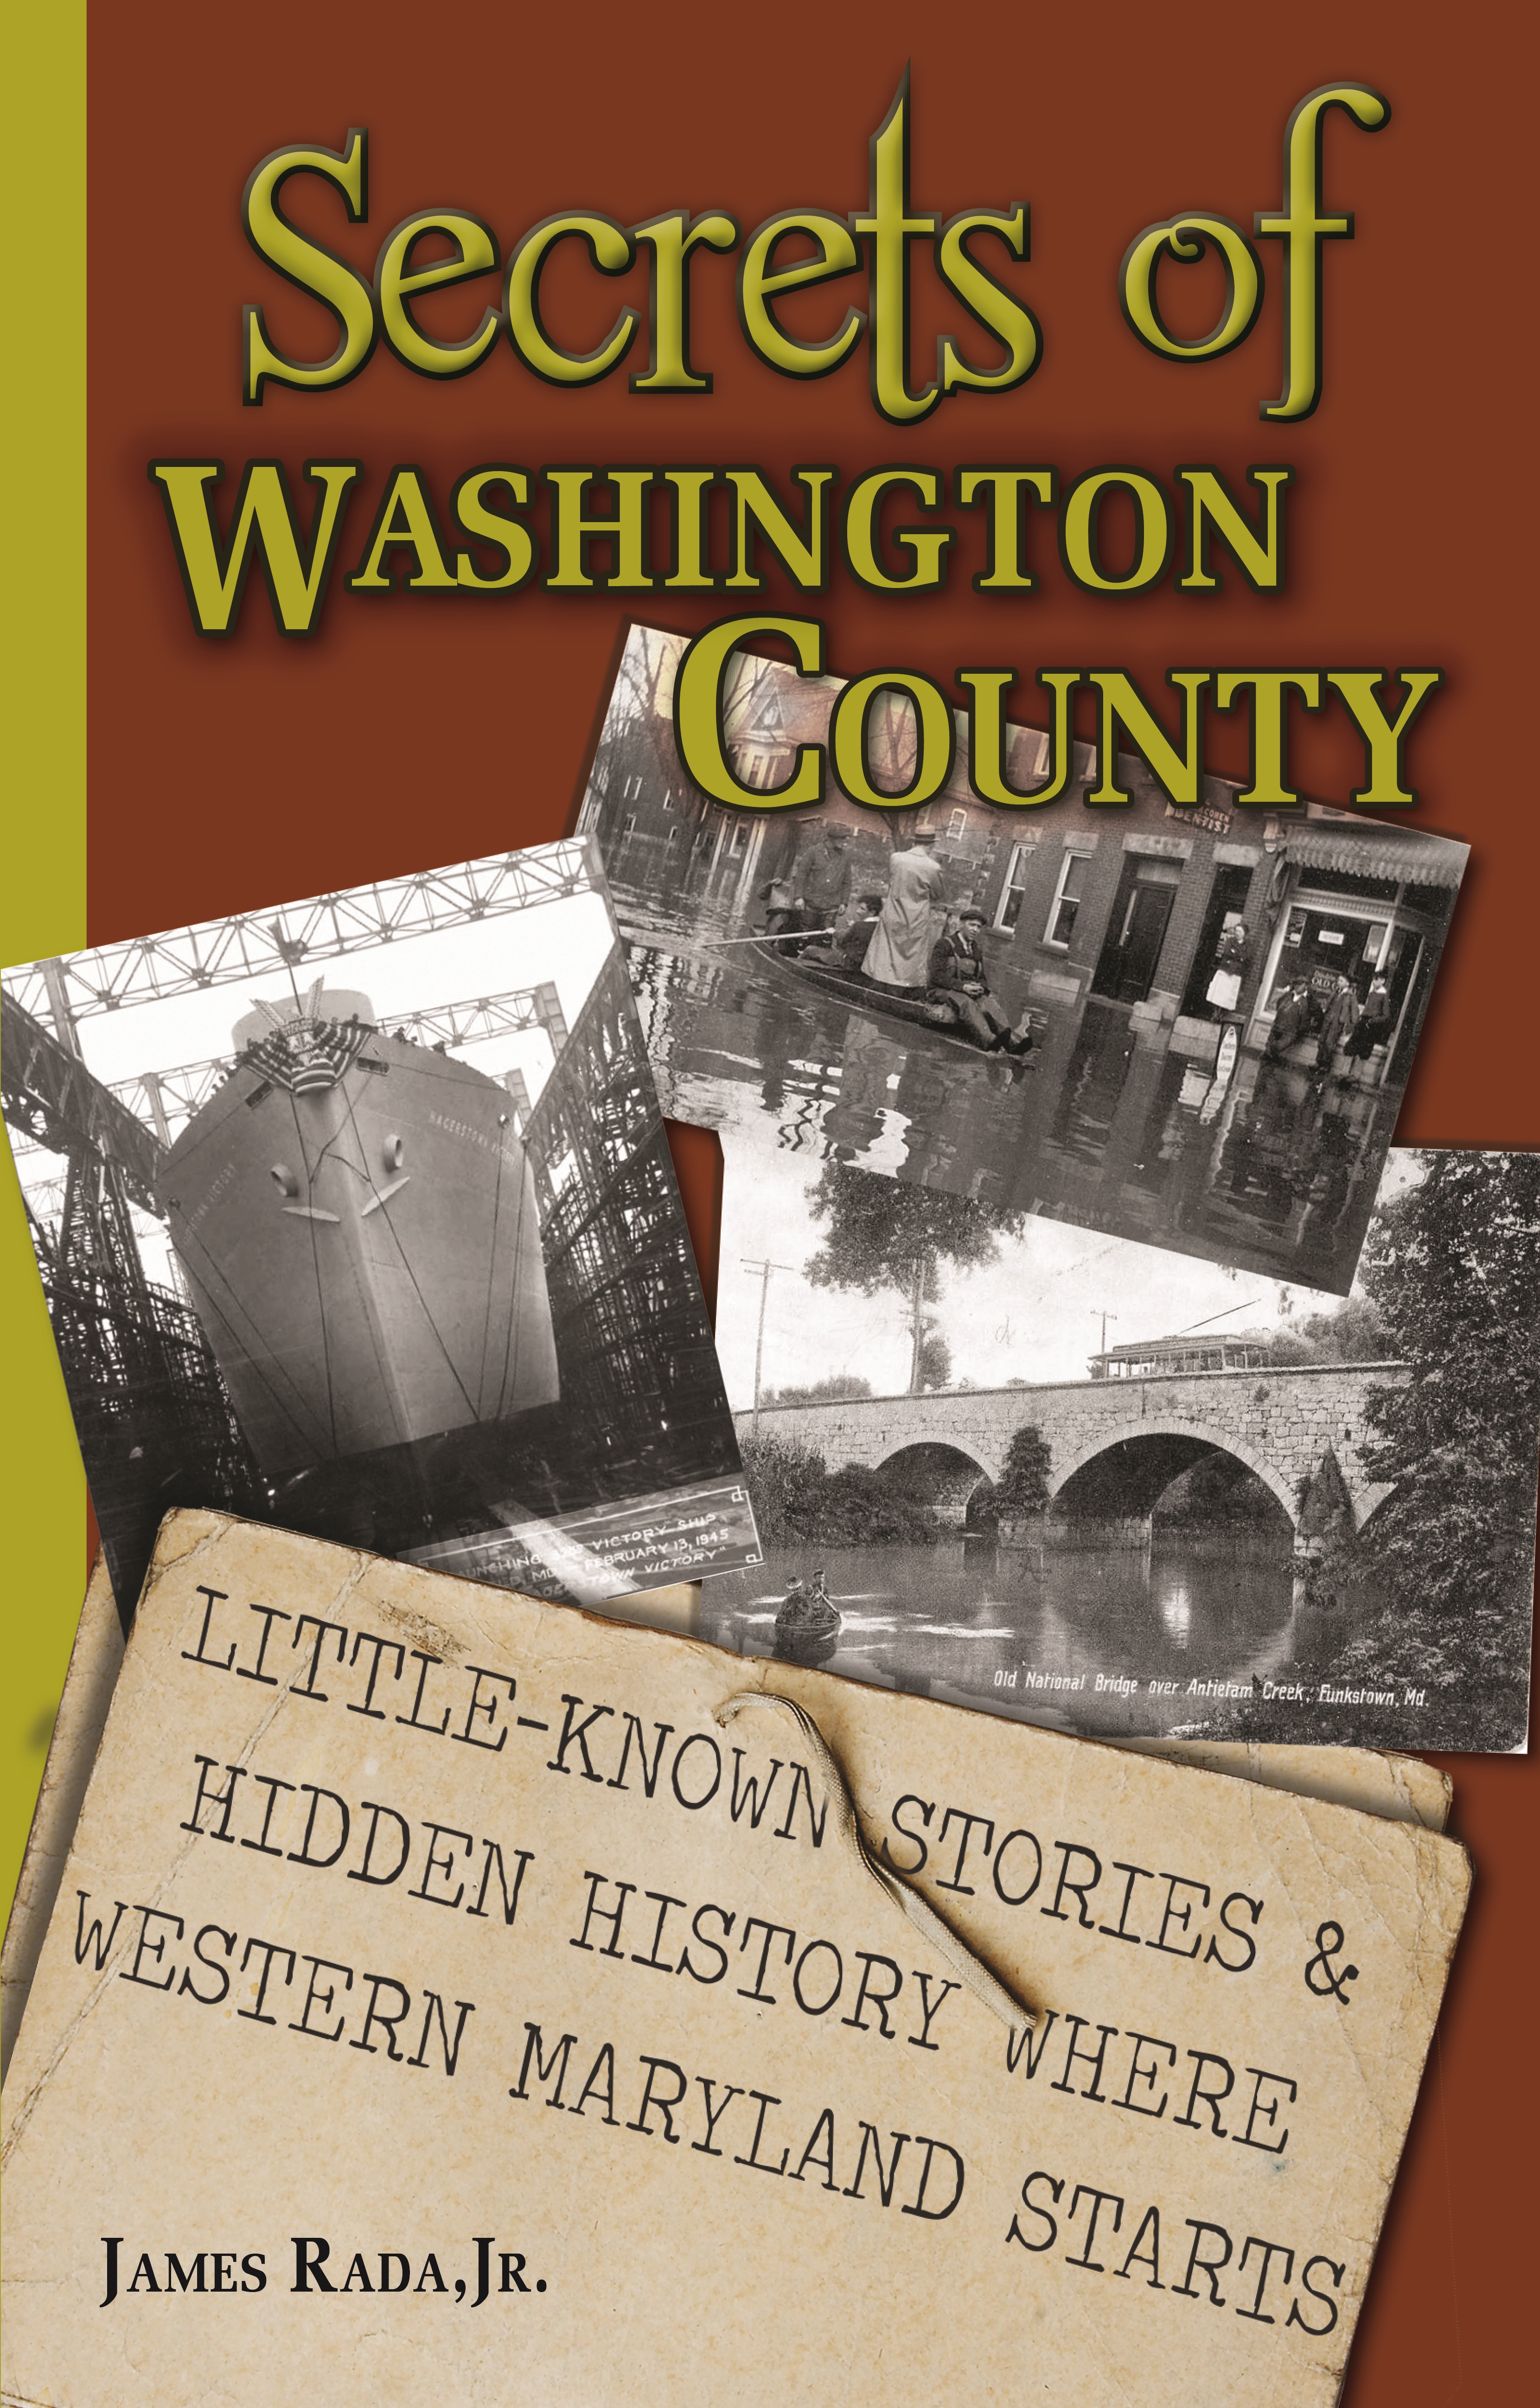 Cover of the book, "Secrets of Washington County: Little-Known Stories & Hidden History Where Western Maryland Starts." Cover includes historic photos of shipyard, flooded street, and bridge over creek..